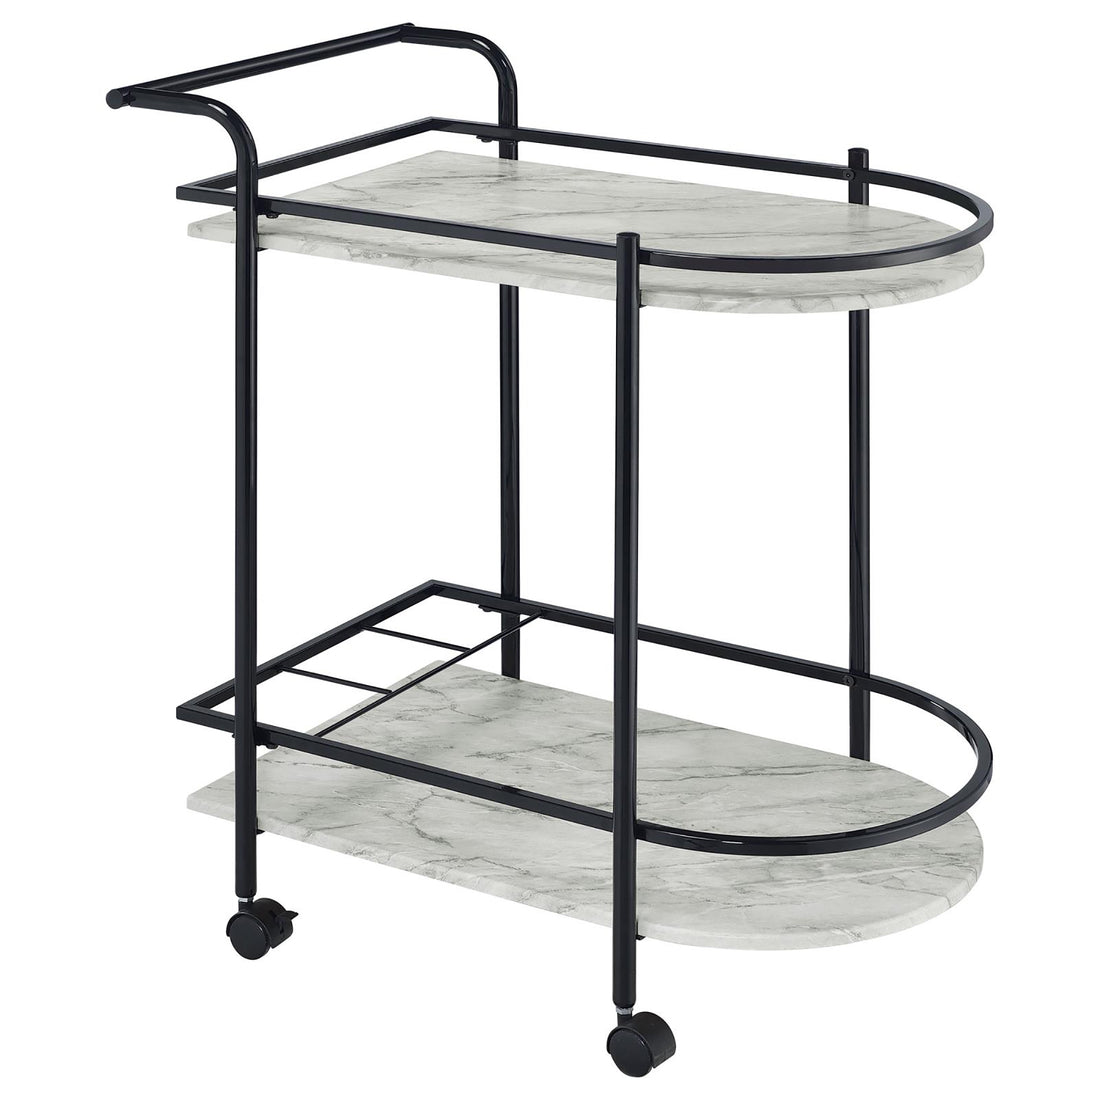 Black and Faux White Marble Serving Cart with